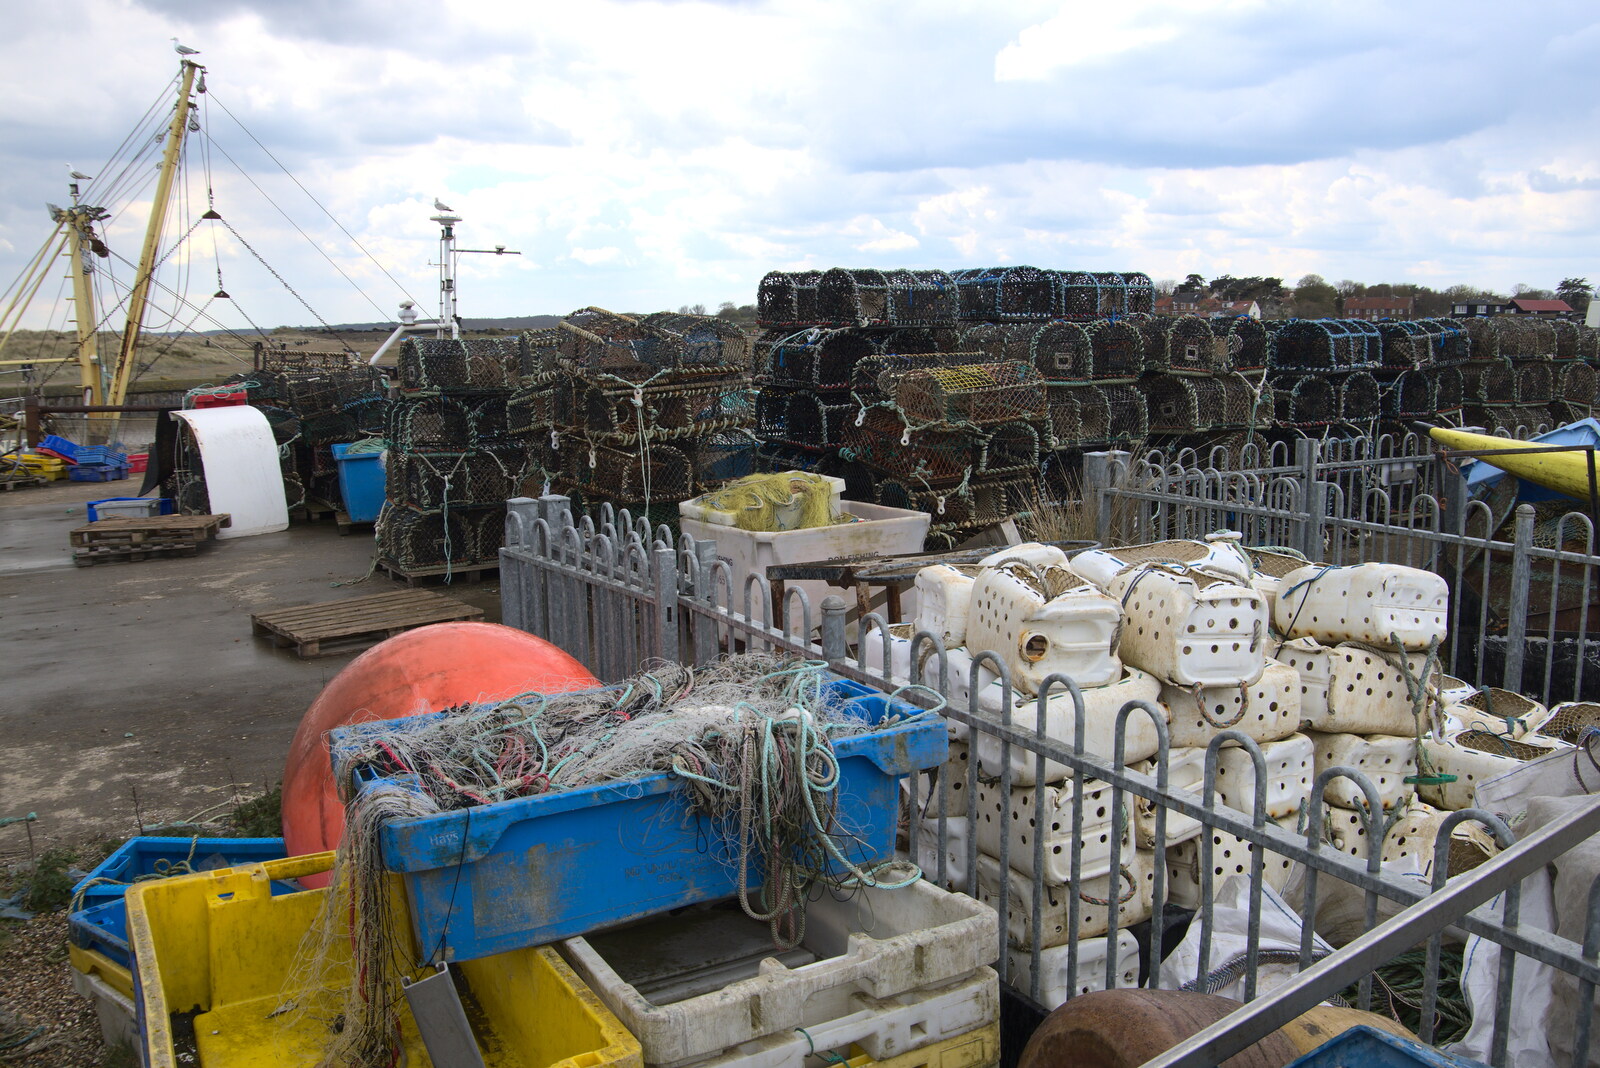 Massed lobster pots - old and new style from A Chilly Trip to the Beach, Southwold Harbour, Suffolk - 2nd May 2021